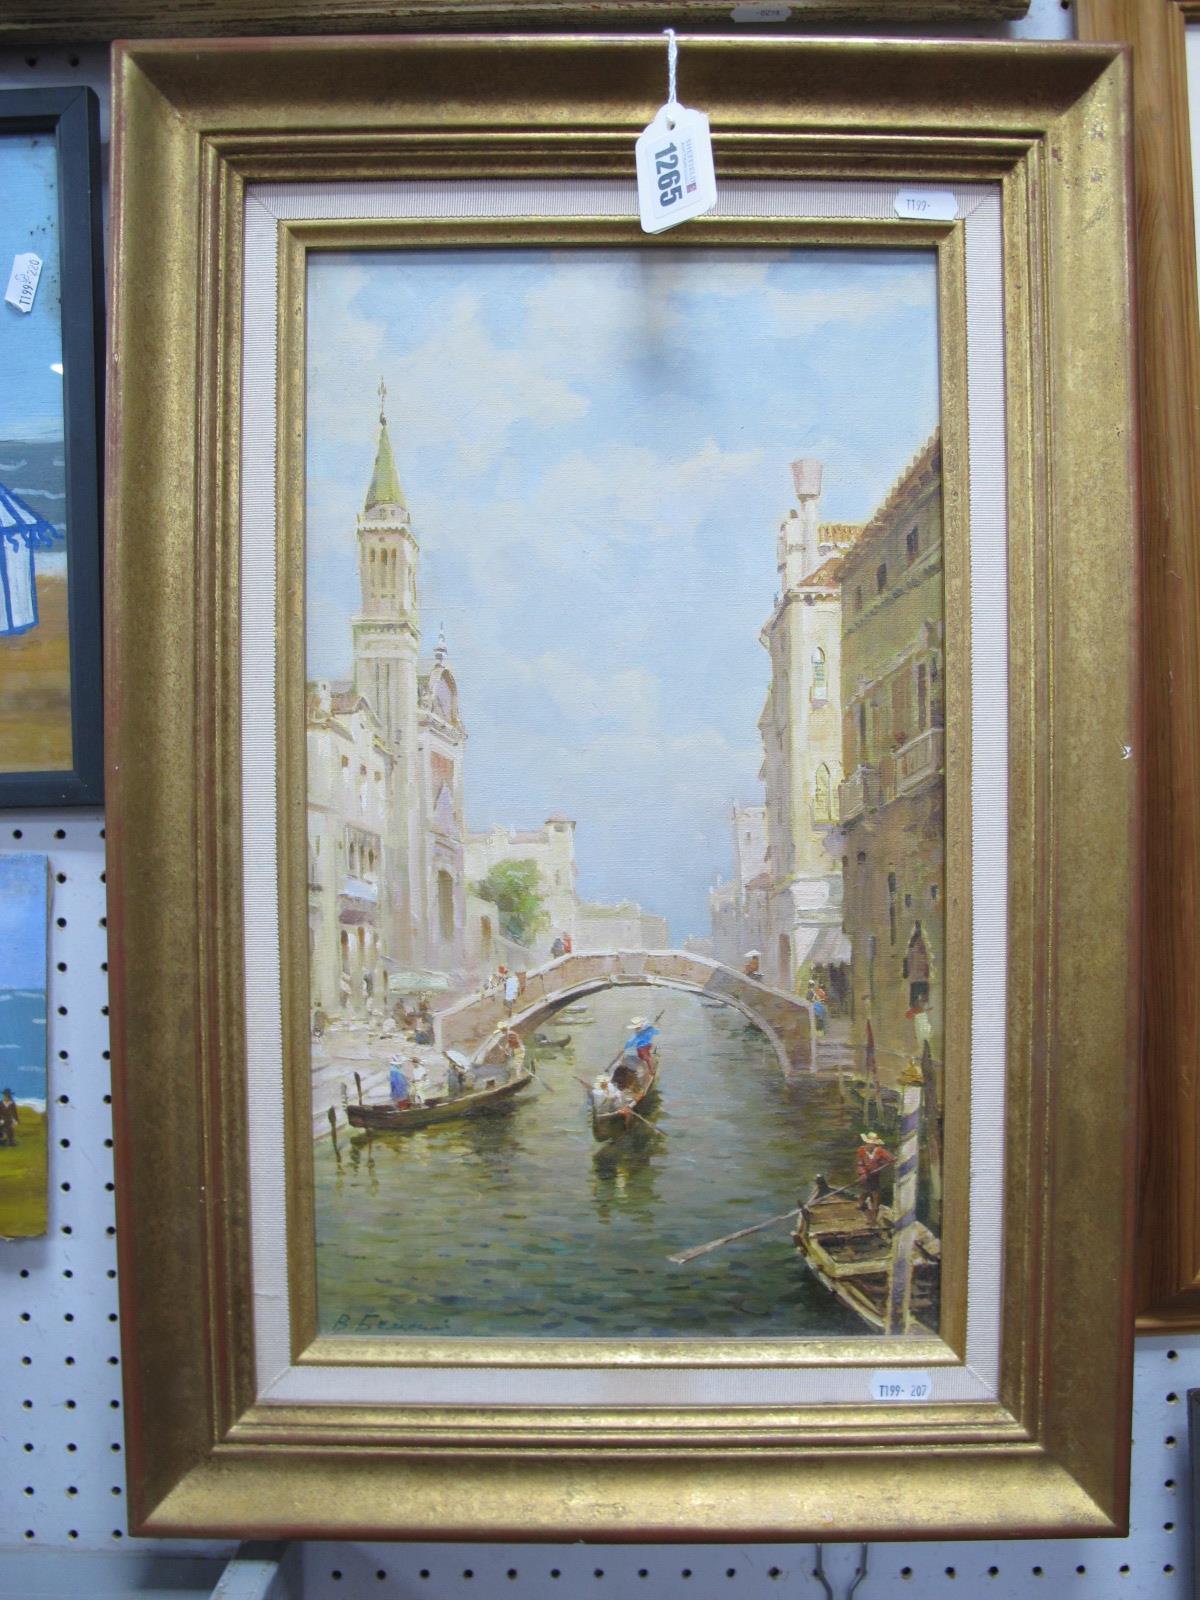 RUSSIAN SCHOOL (XX CENTURY) A Venetian Canal Scene, oil on canvas, signed indistinctly lower left